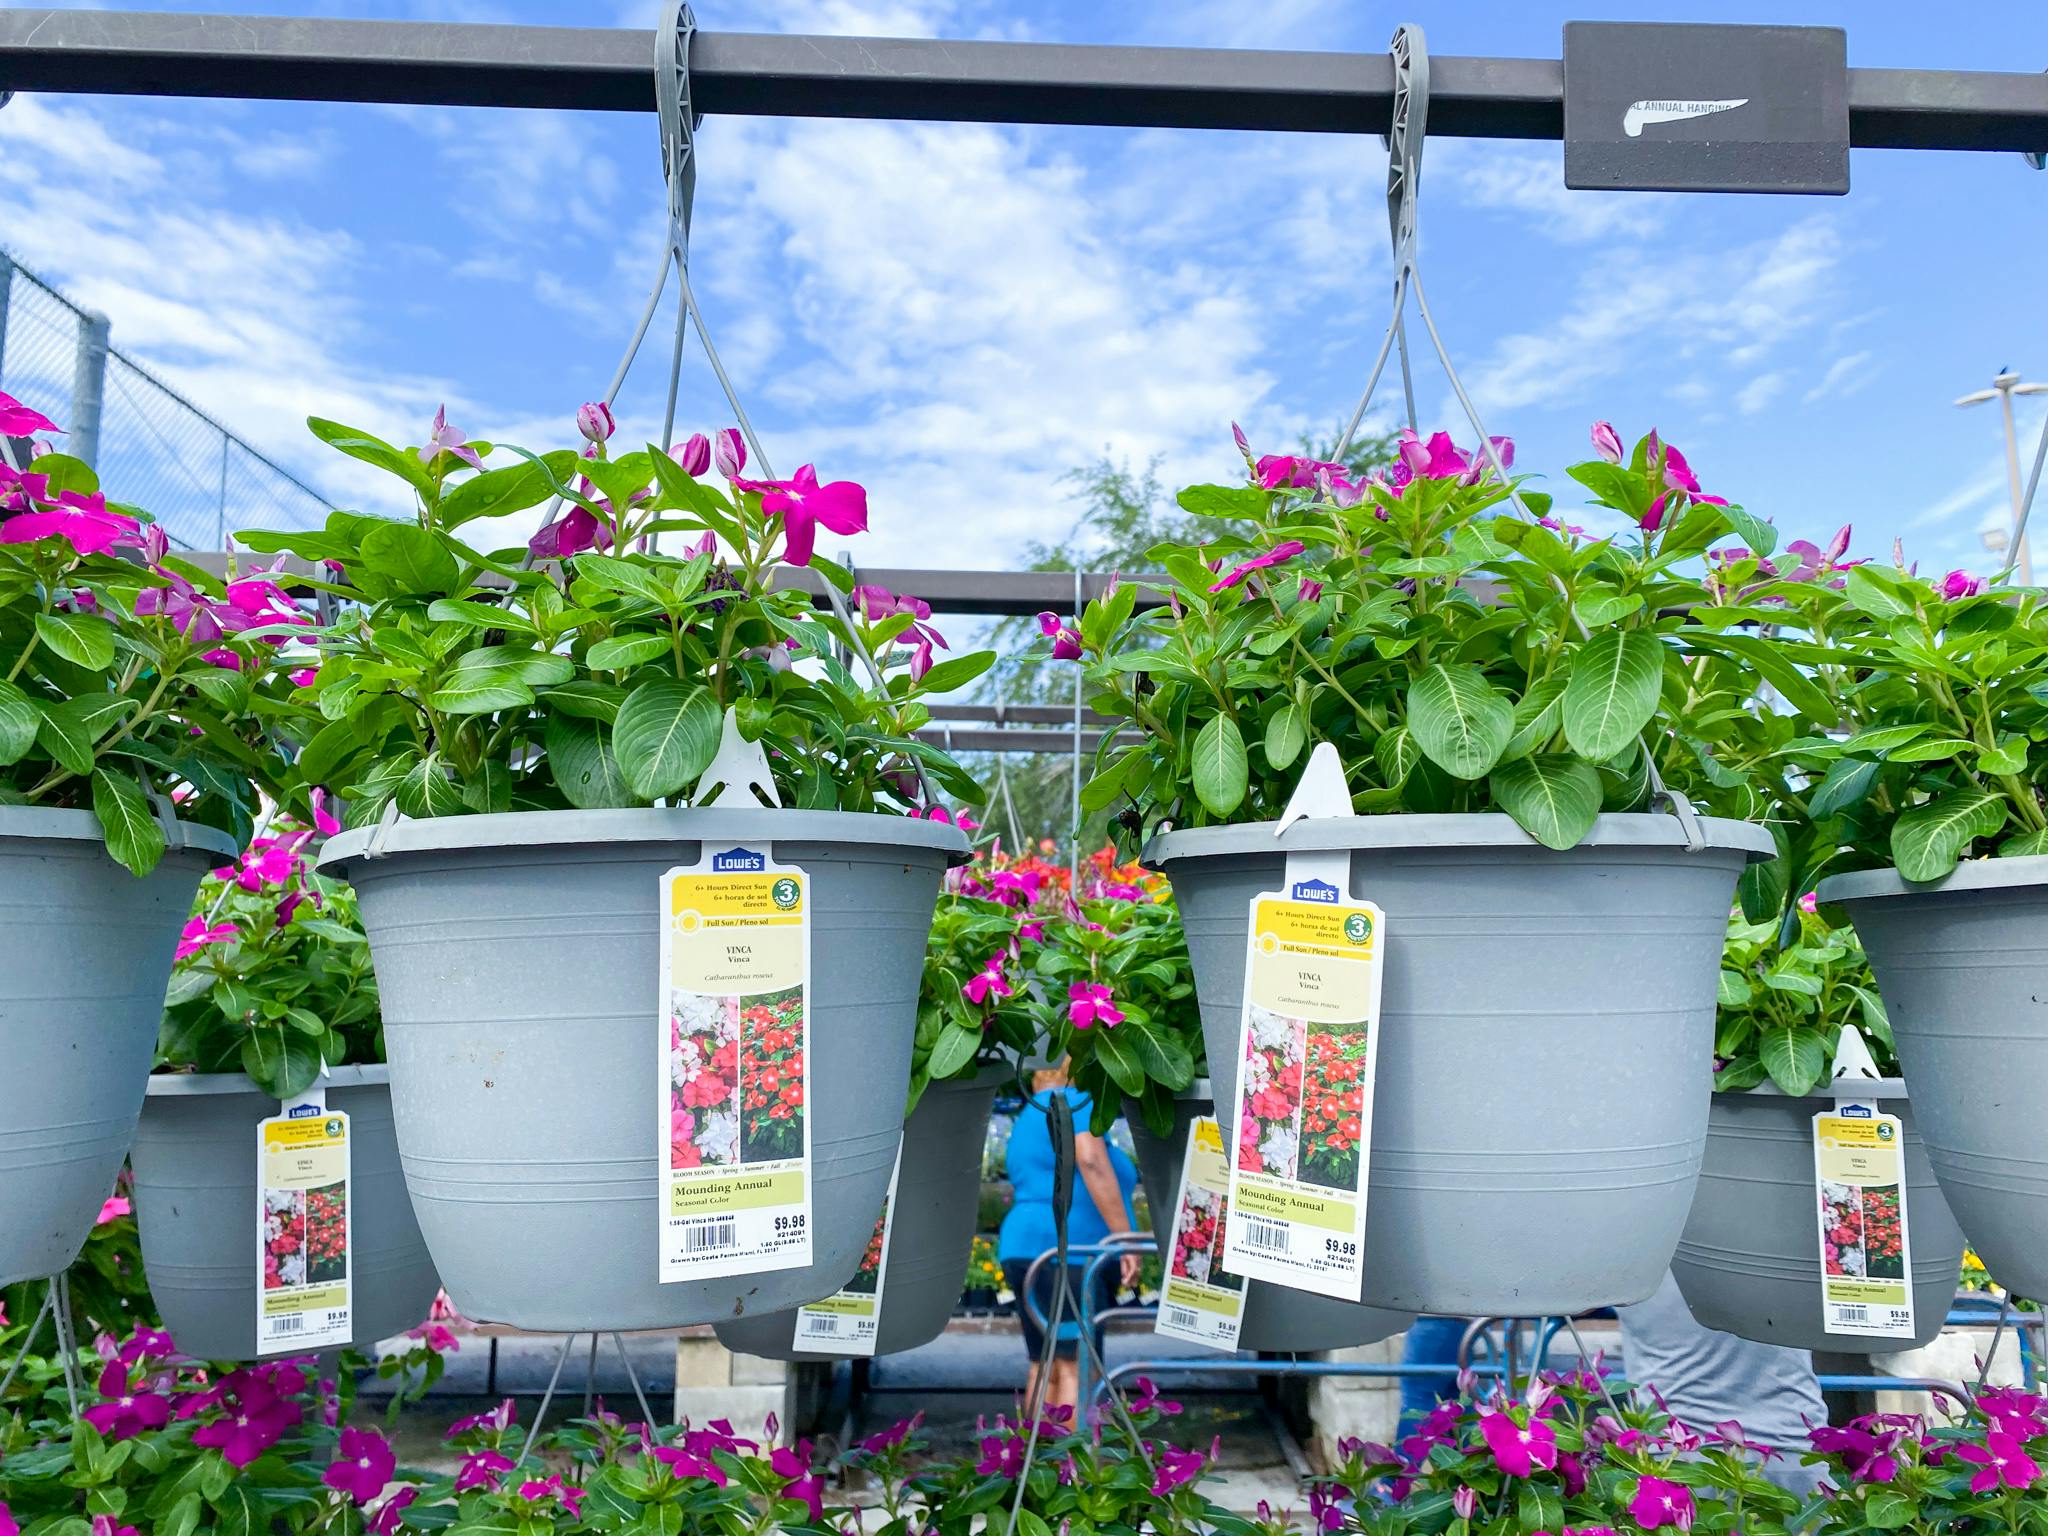 Hanging flower baskets on display at Lowe's.